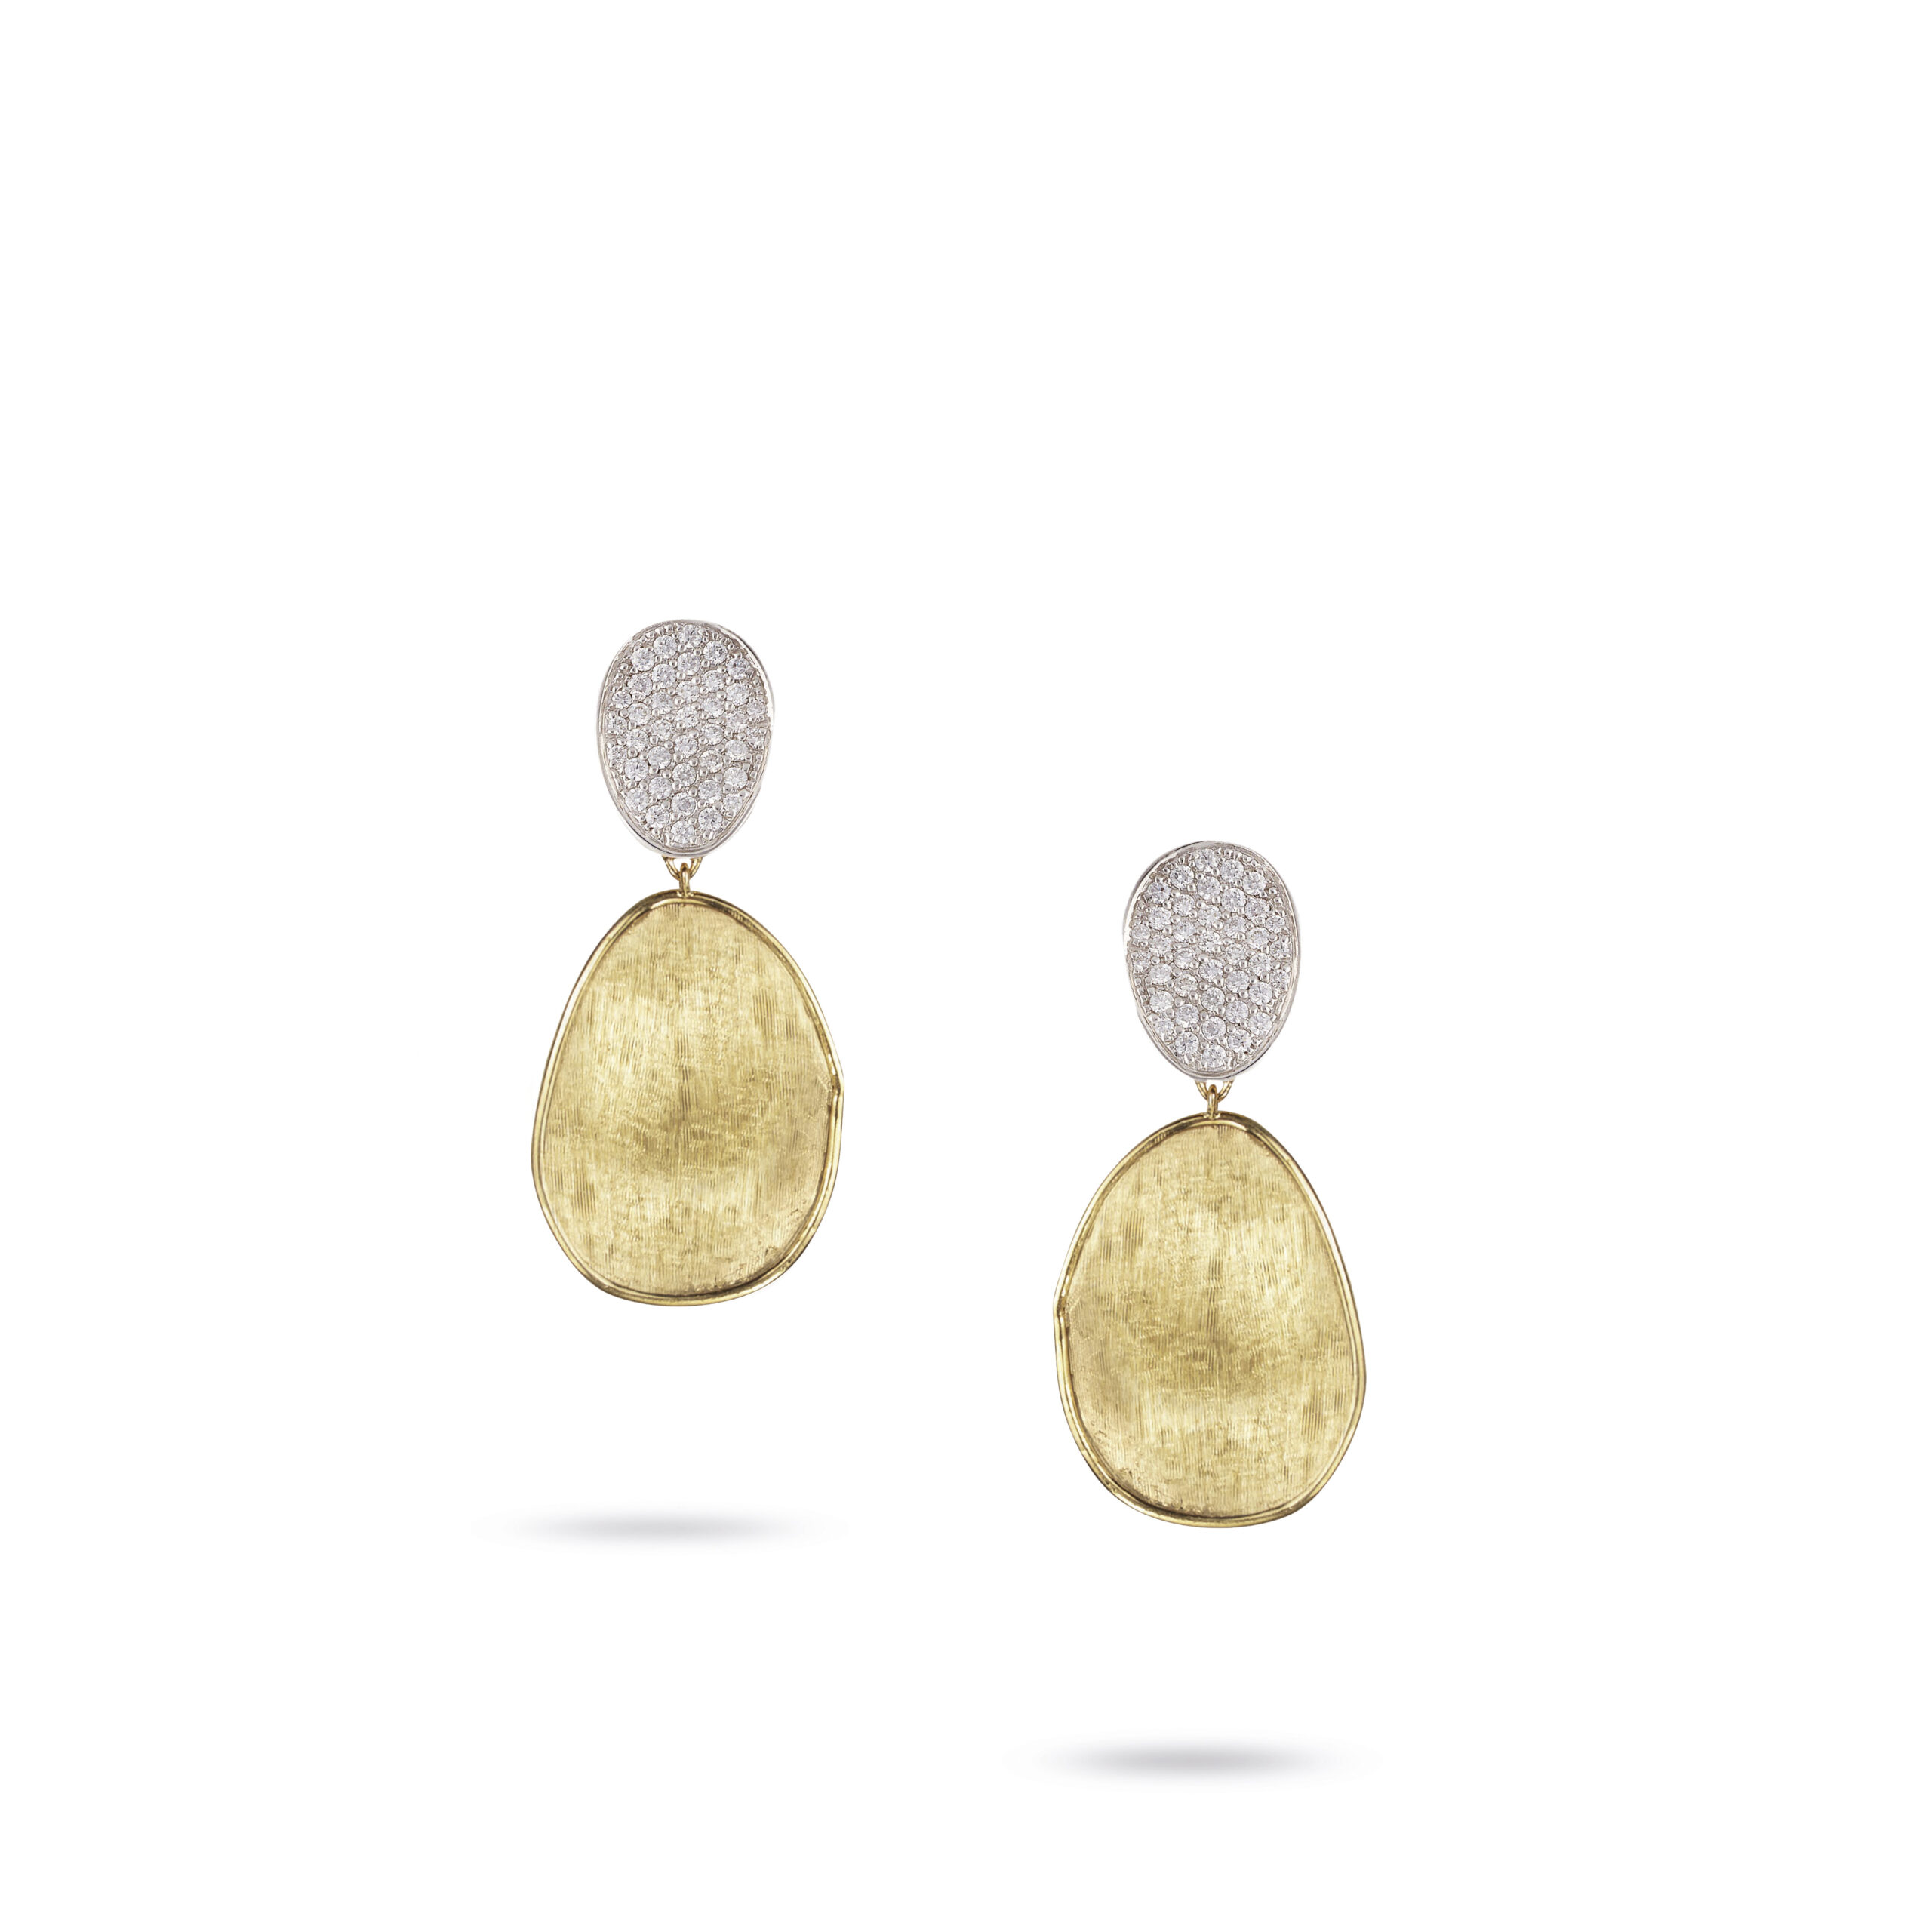 OB1751 B YW Q6Marco Bicego Lunaria Collection 18k Yellow Gold and Diamond Petite Double Drop Earrings